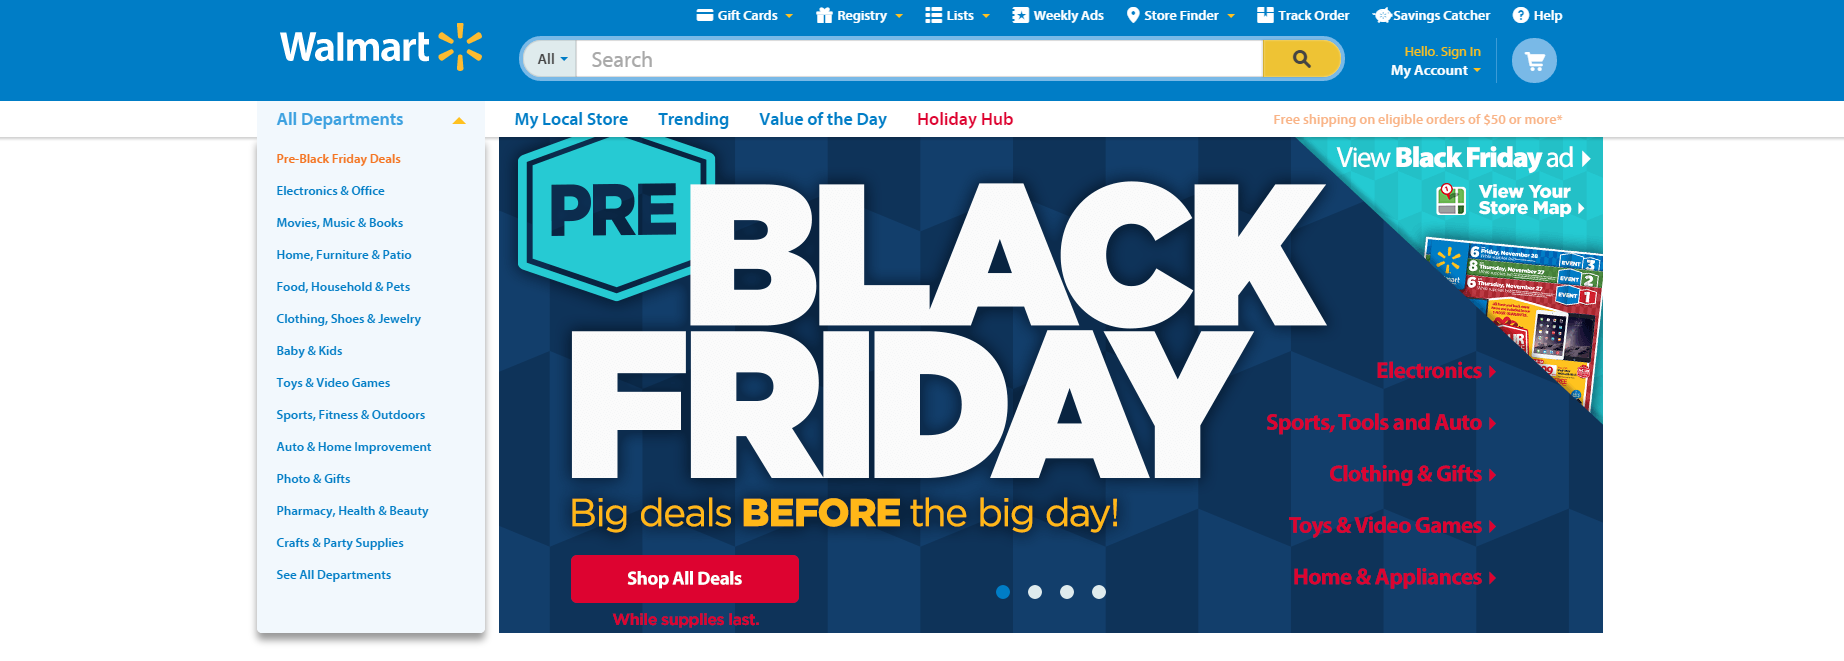 5 Effective Black Friday Landing Page Tips & Examples - Does Ross Have Any Black Friday Deals